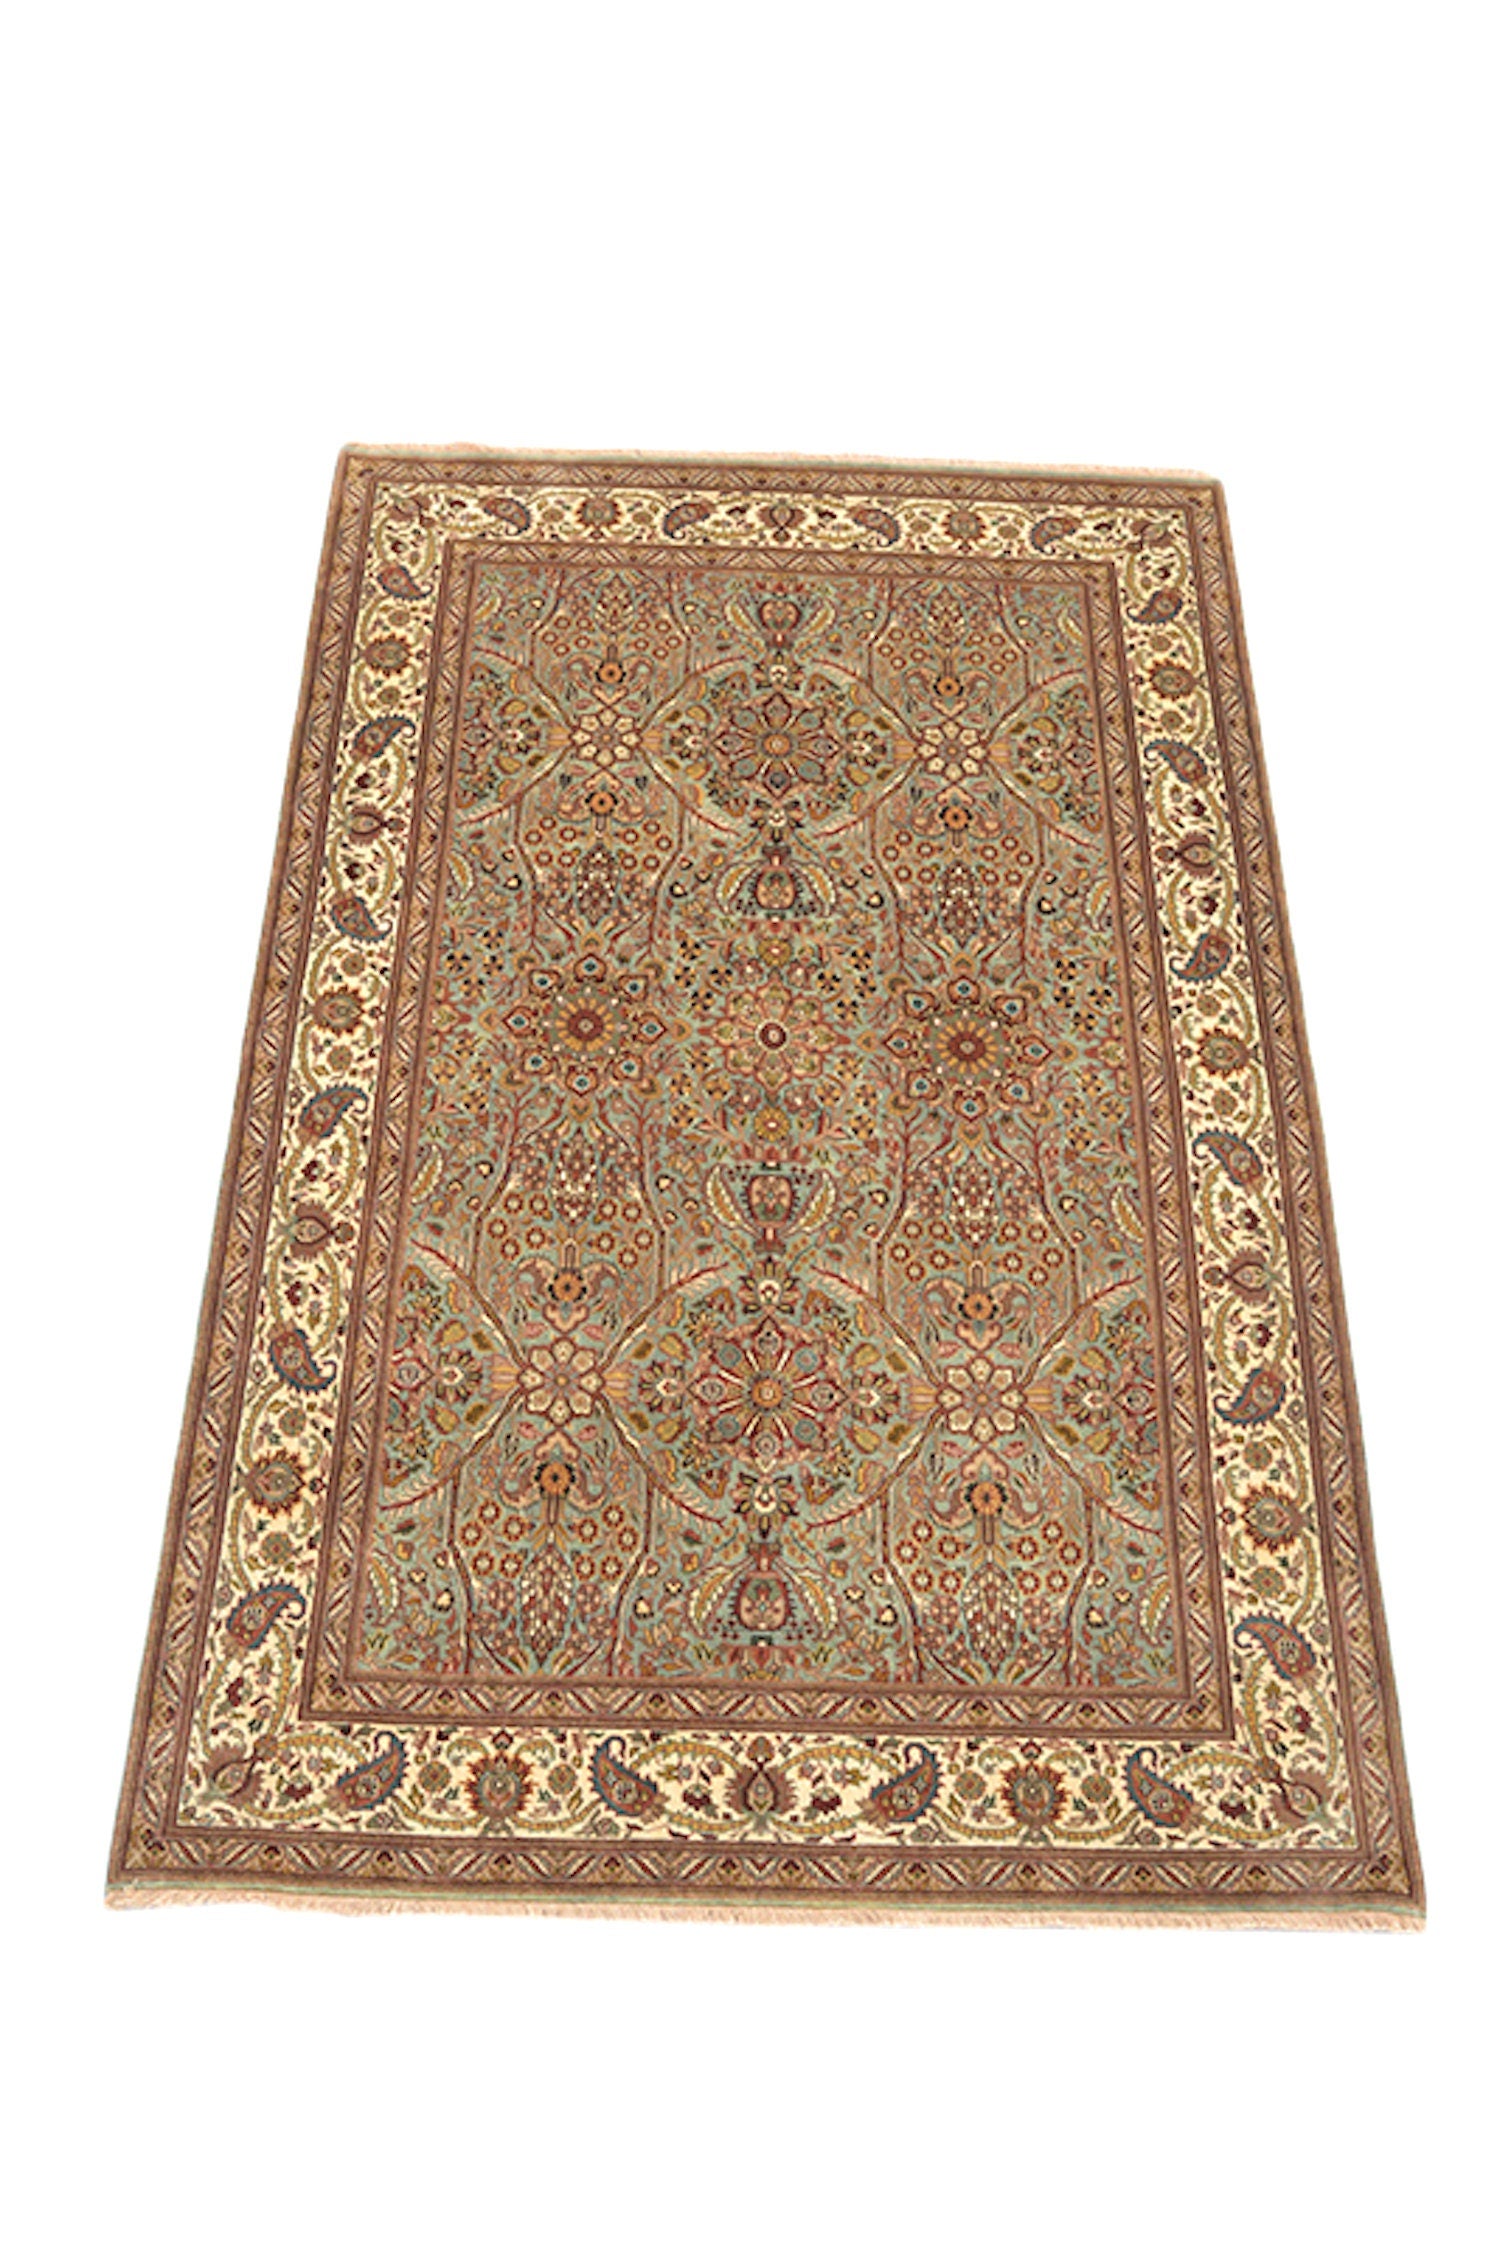 Beige Vintage 6x9 Rug, Oriental Persian Style Floral Designs, One of a Kind Wool Area Rug, Traditional Handmade Rug